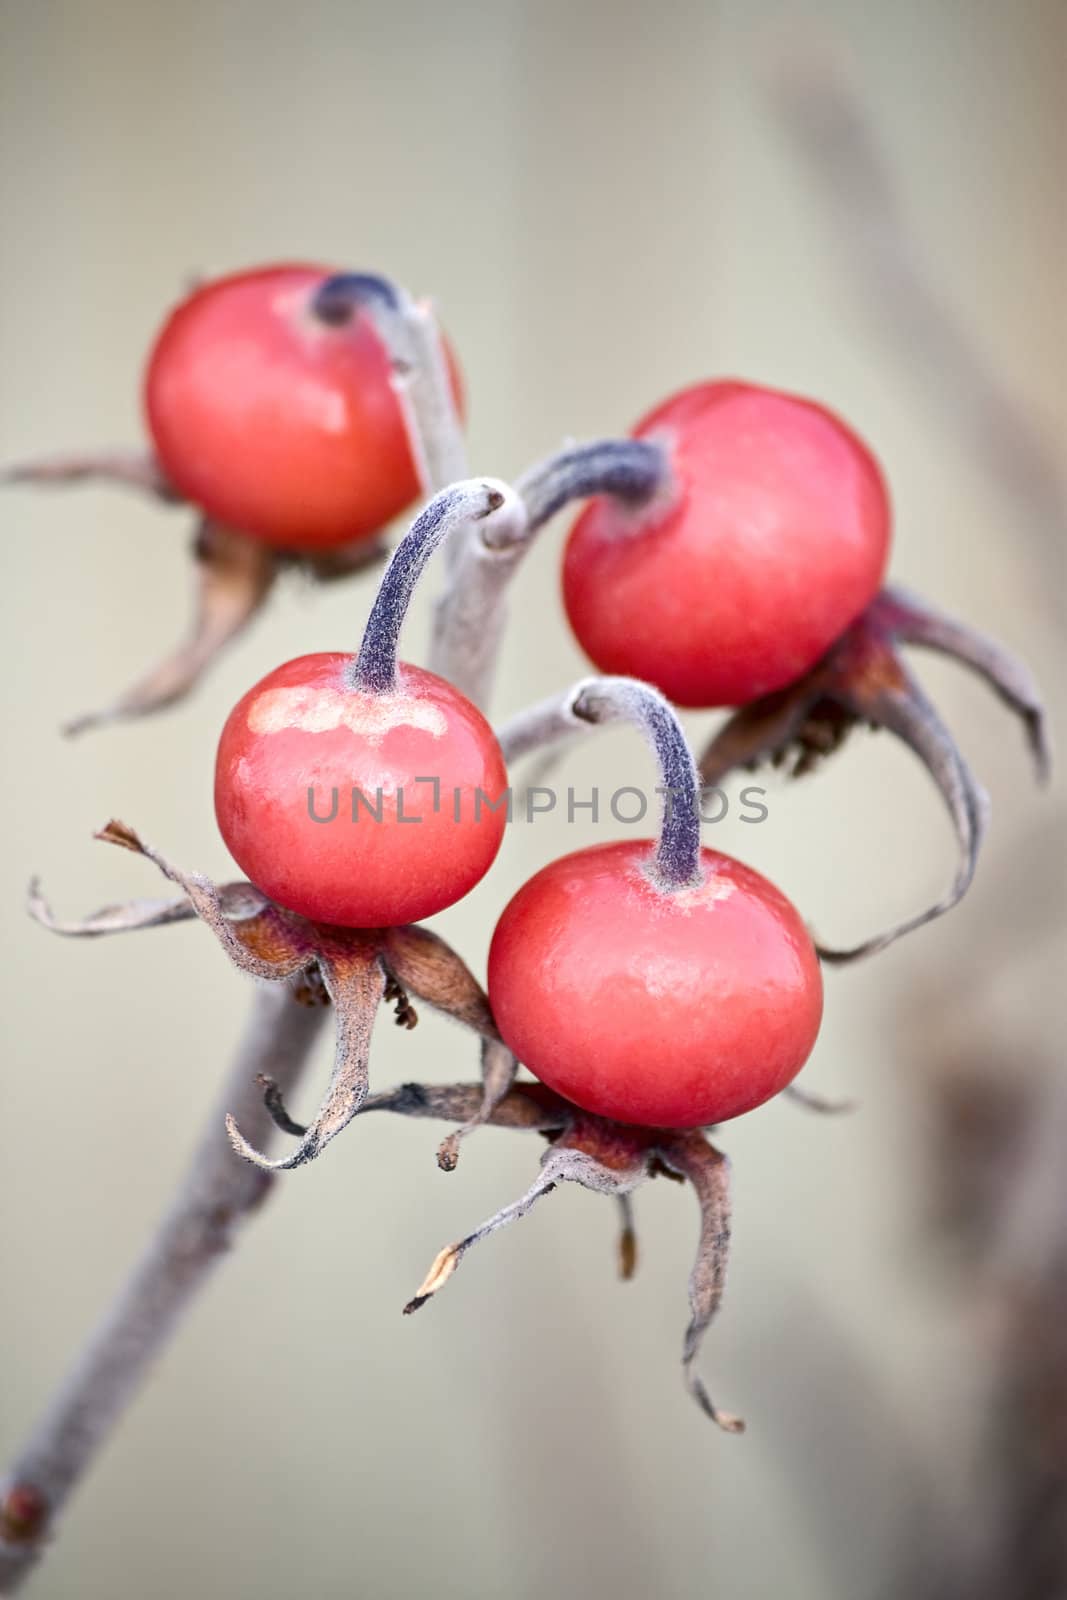 Rosehip berries on  light background. Image with shallow depth of field.